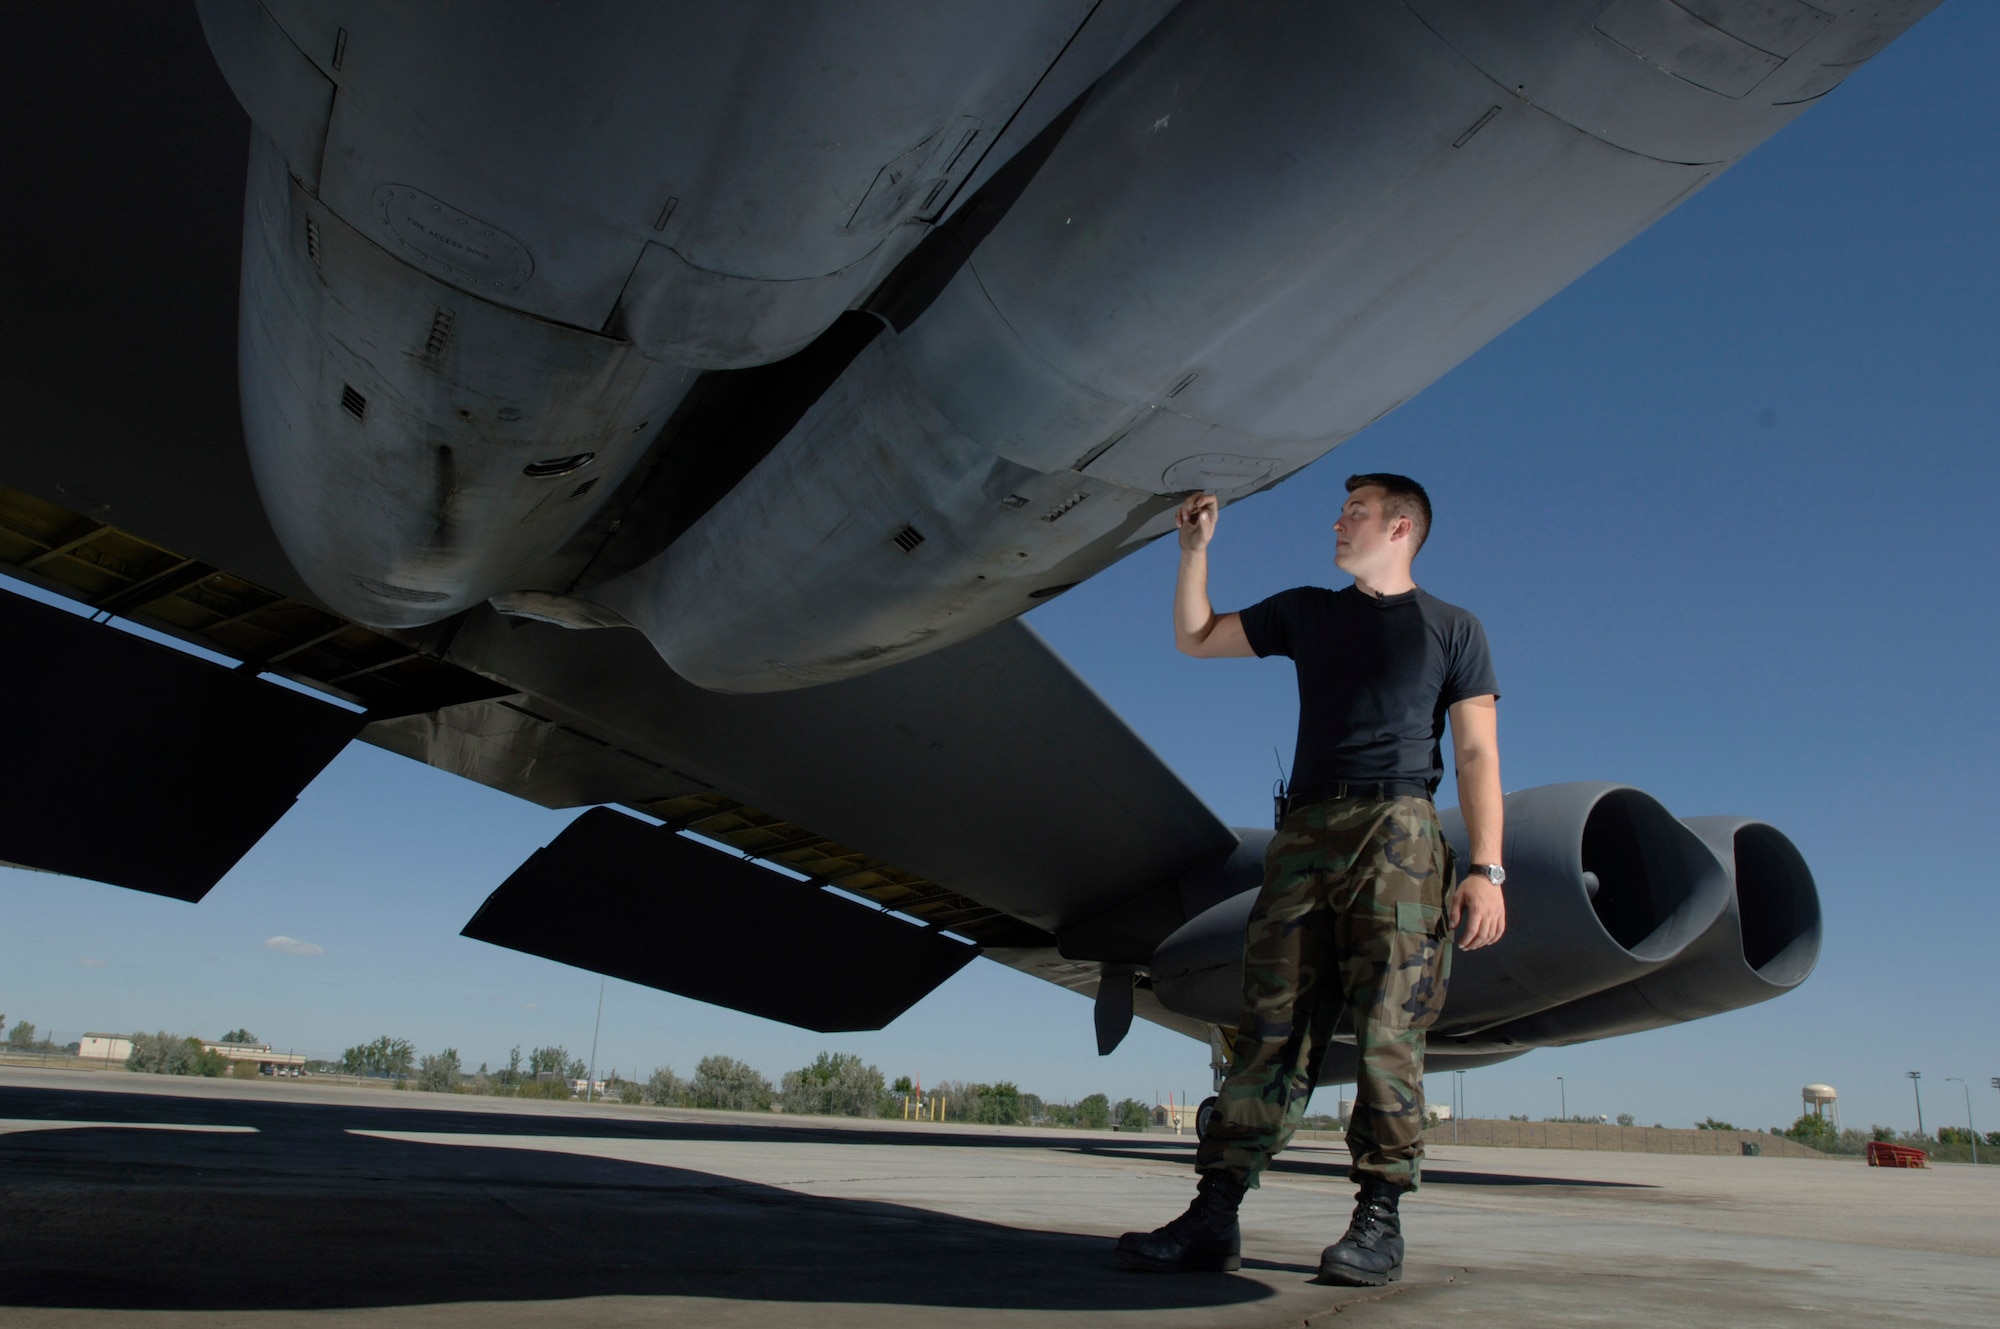 Staff Sgt. Kory McLeod inspects the cowling of engines No. 3 and 4 under the wing of a B-52 Stratofortress at Minot Air Force Base, N.D., Aug. 22. Sergeant McLeod, from Manchester, N.H., is a crew chief with the 5th Aircraft Maintenance Squadron. (U.S. Air Force photo/Master Sgt. Lance Cheung)